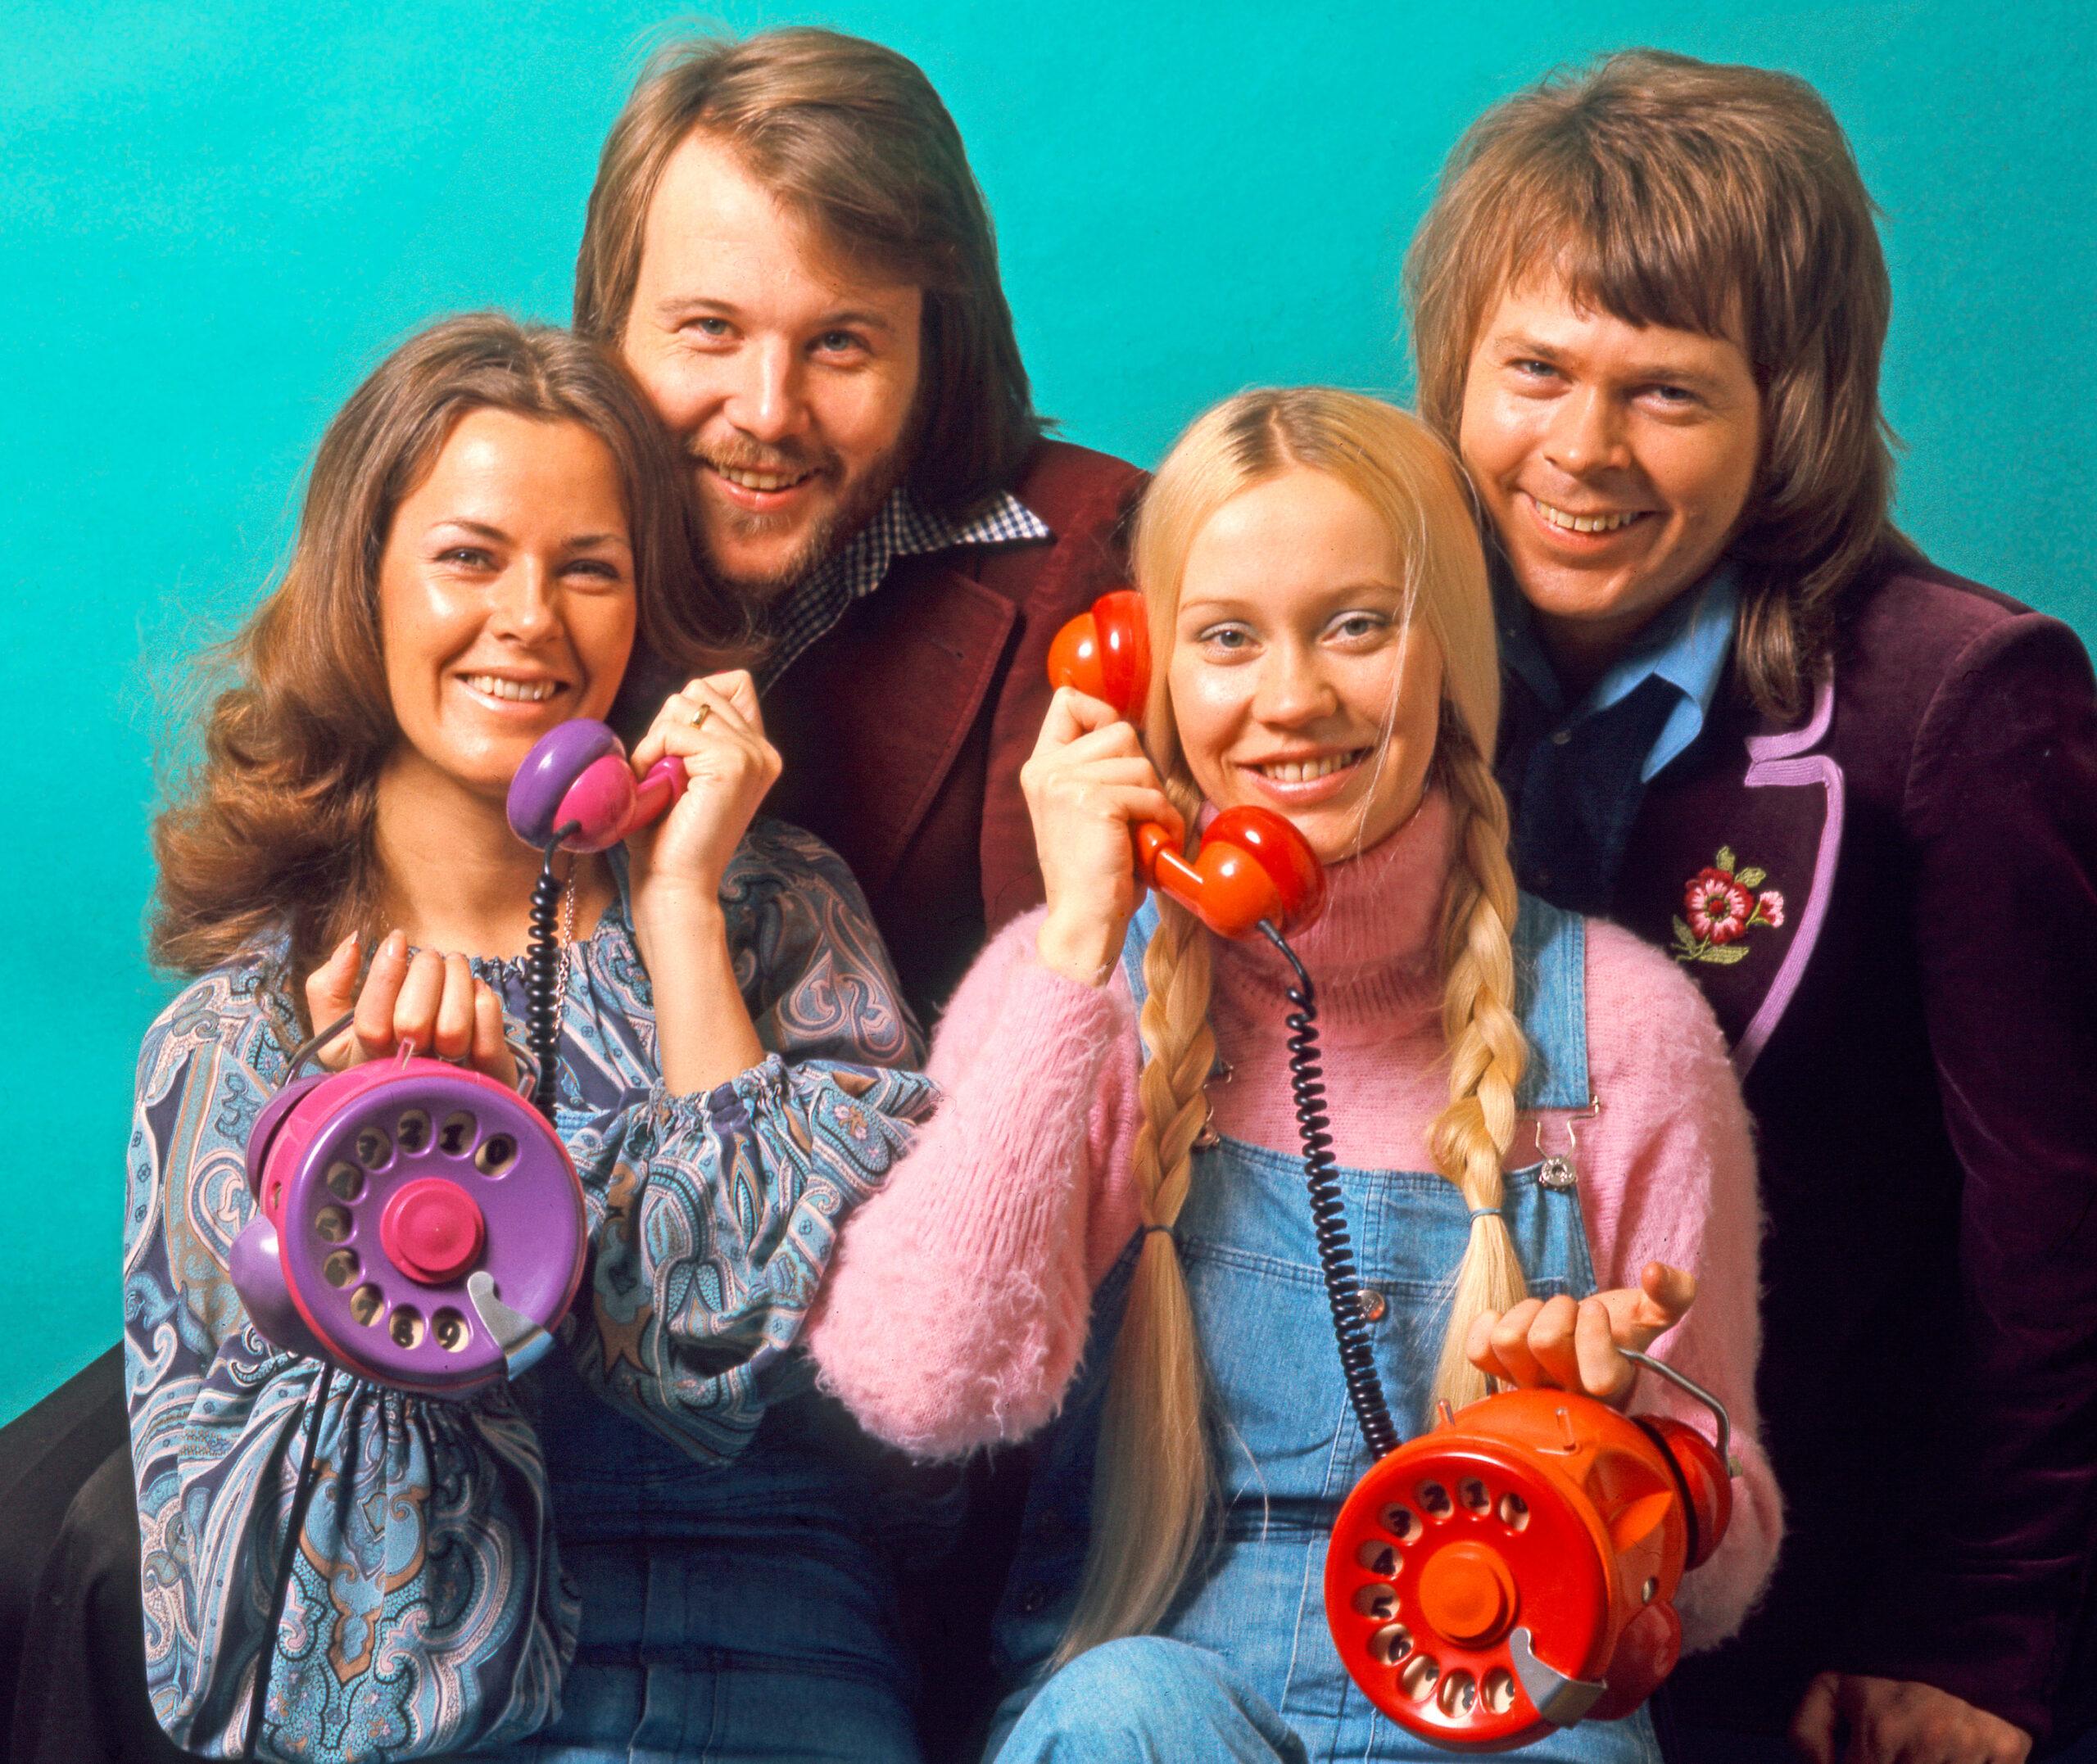 ABBA Press photo (only licensed for Ring Ring release - no other use)